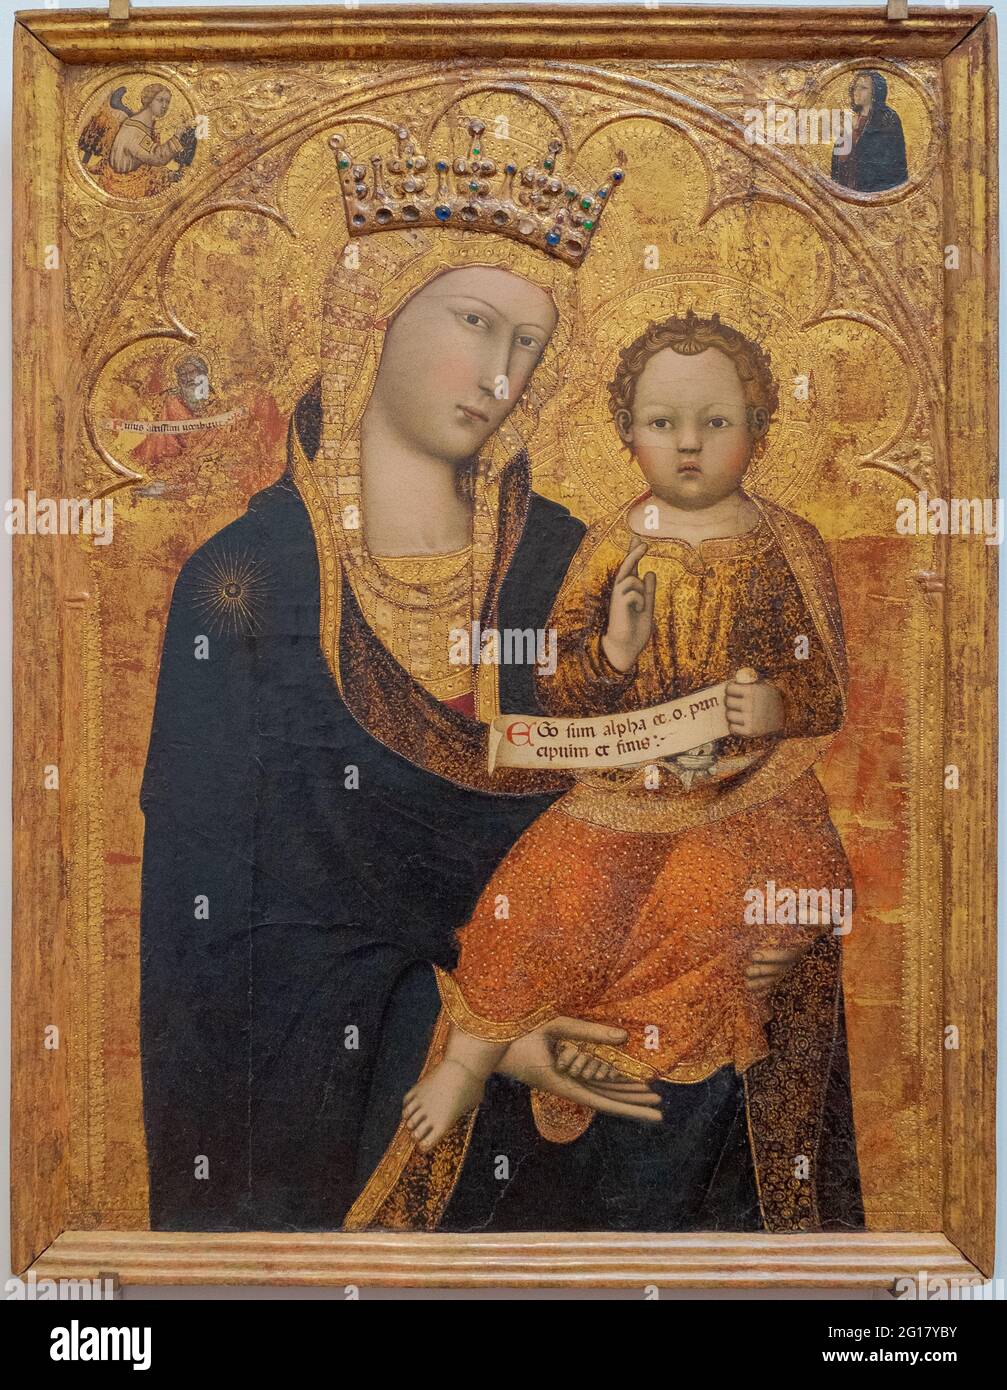 Andrea Vanni, Madonna and Child with saint Luke Evangelist, 1390, tempera and gold on wood panel, Uffizi Galleries, Florence, Italy. Stock Photo